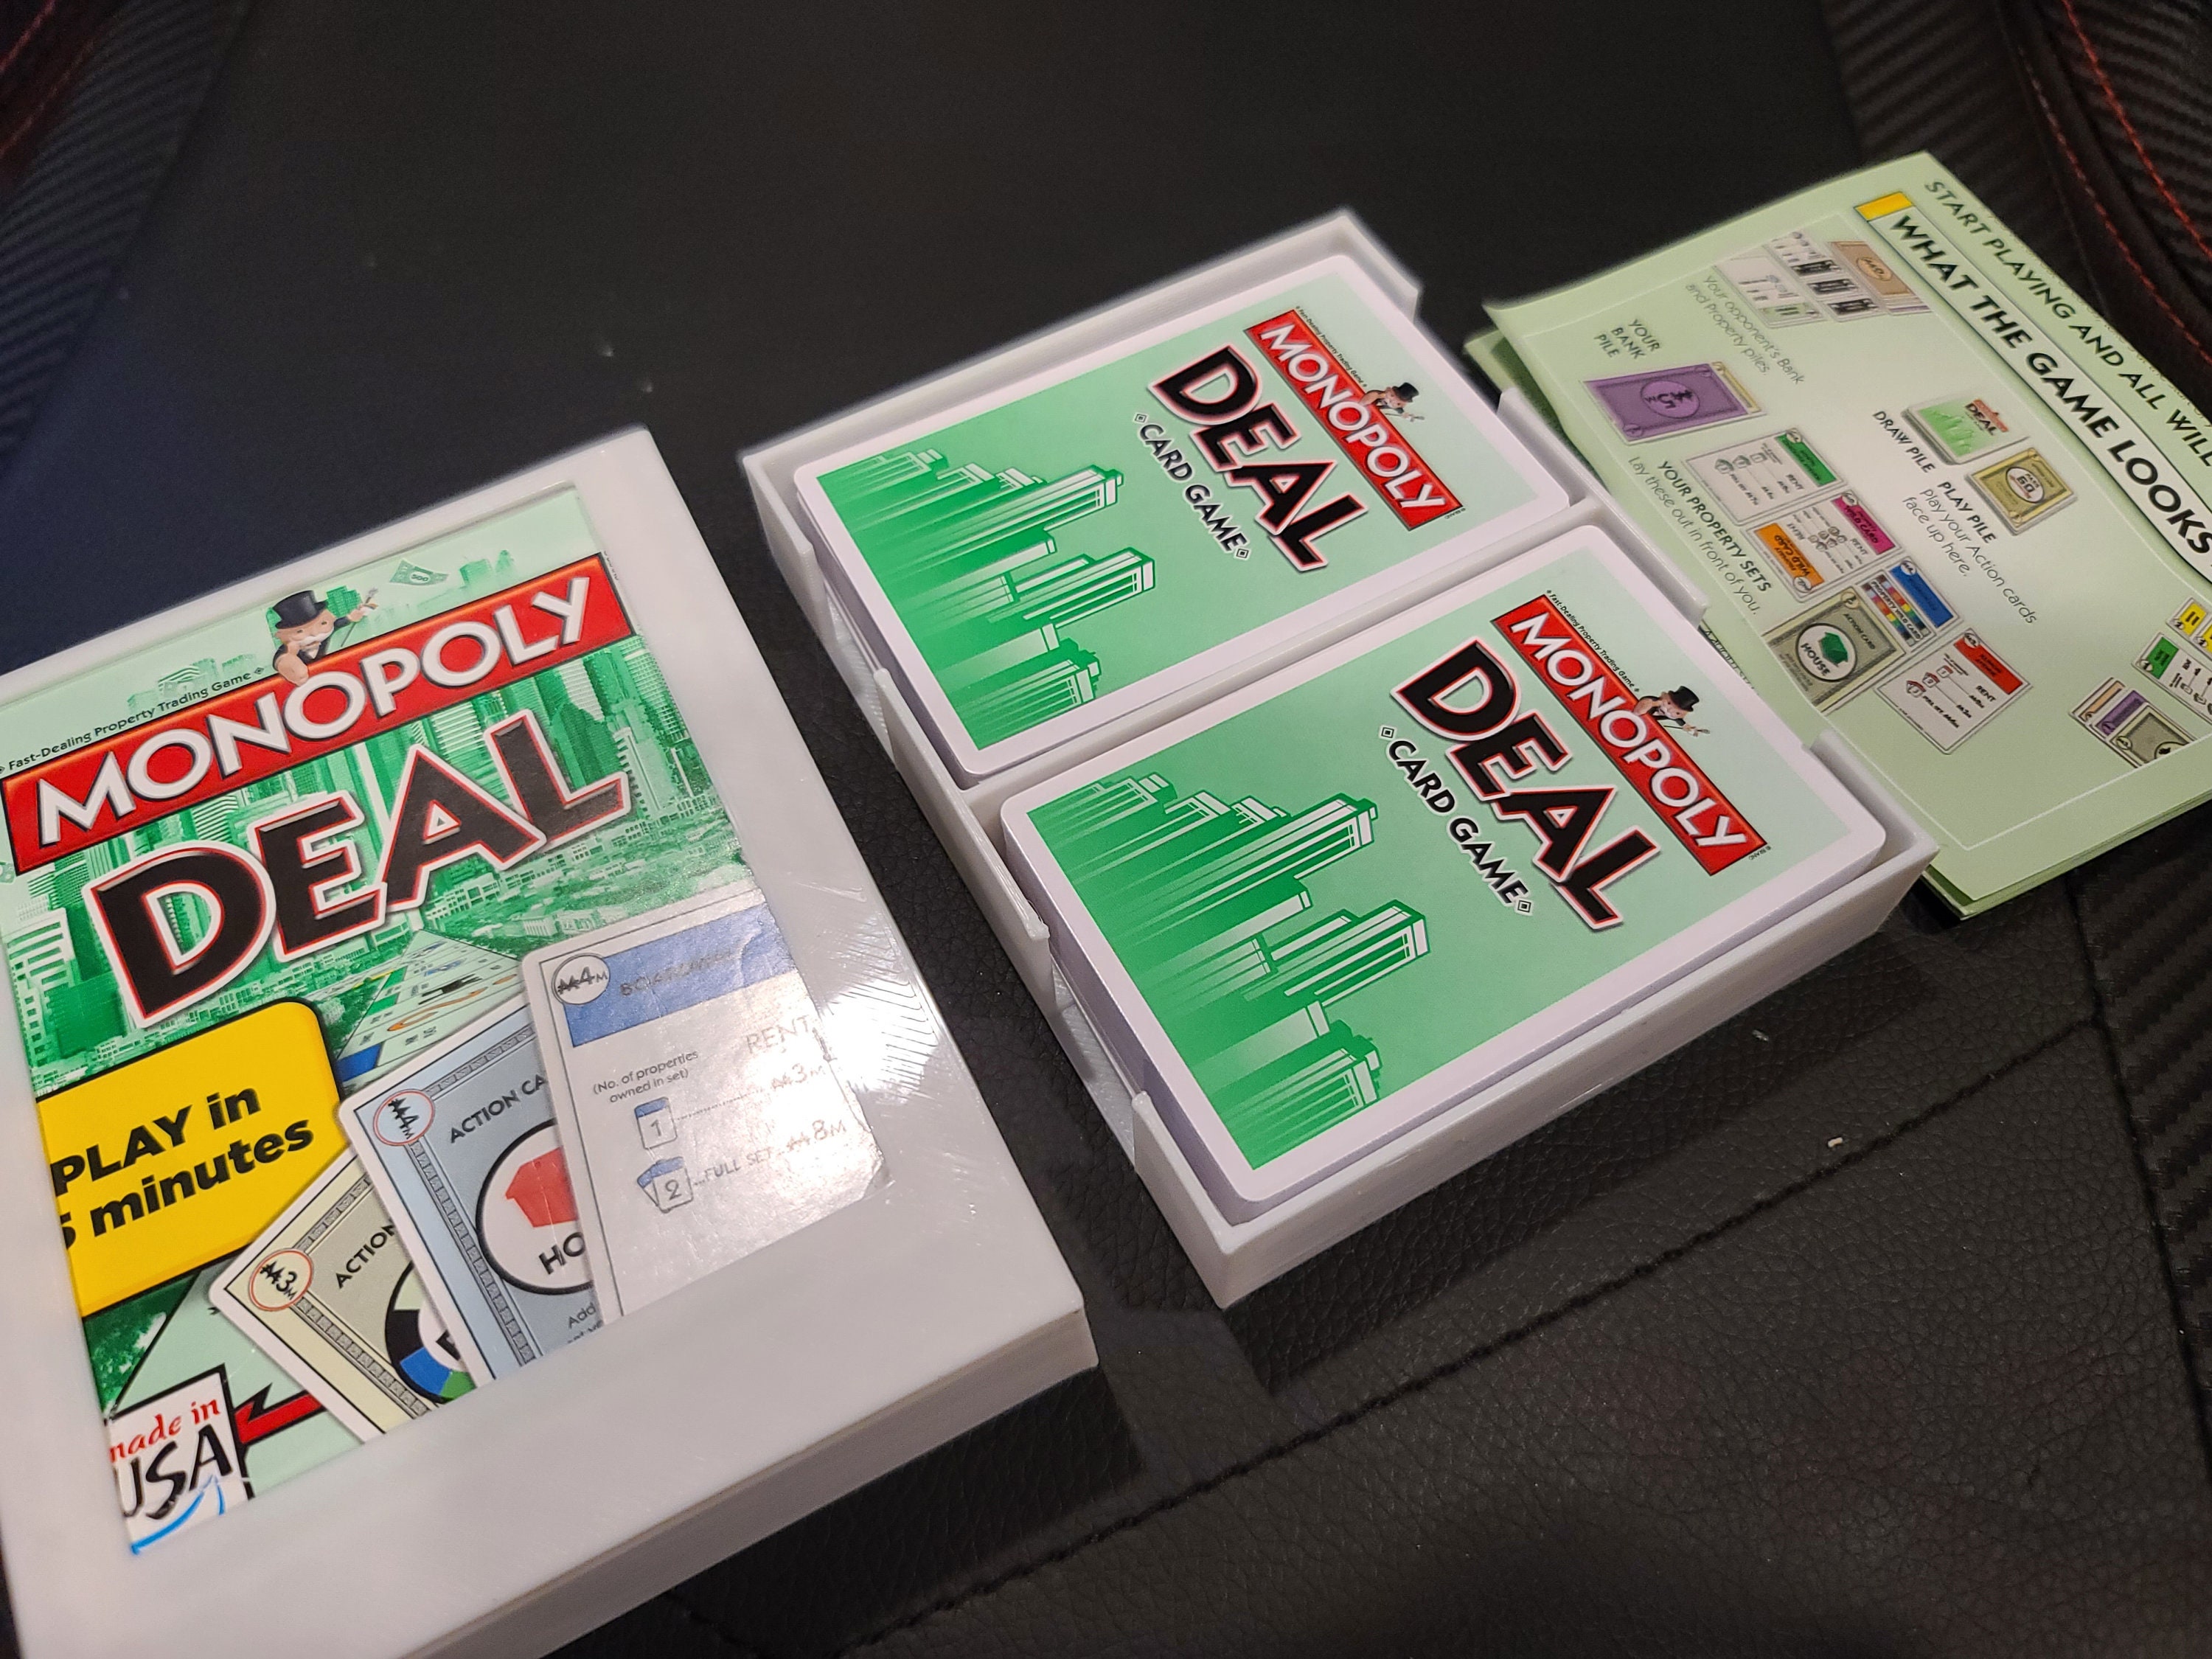 Monopoly deal - Cdiscount